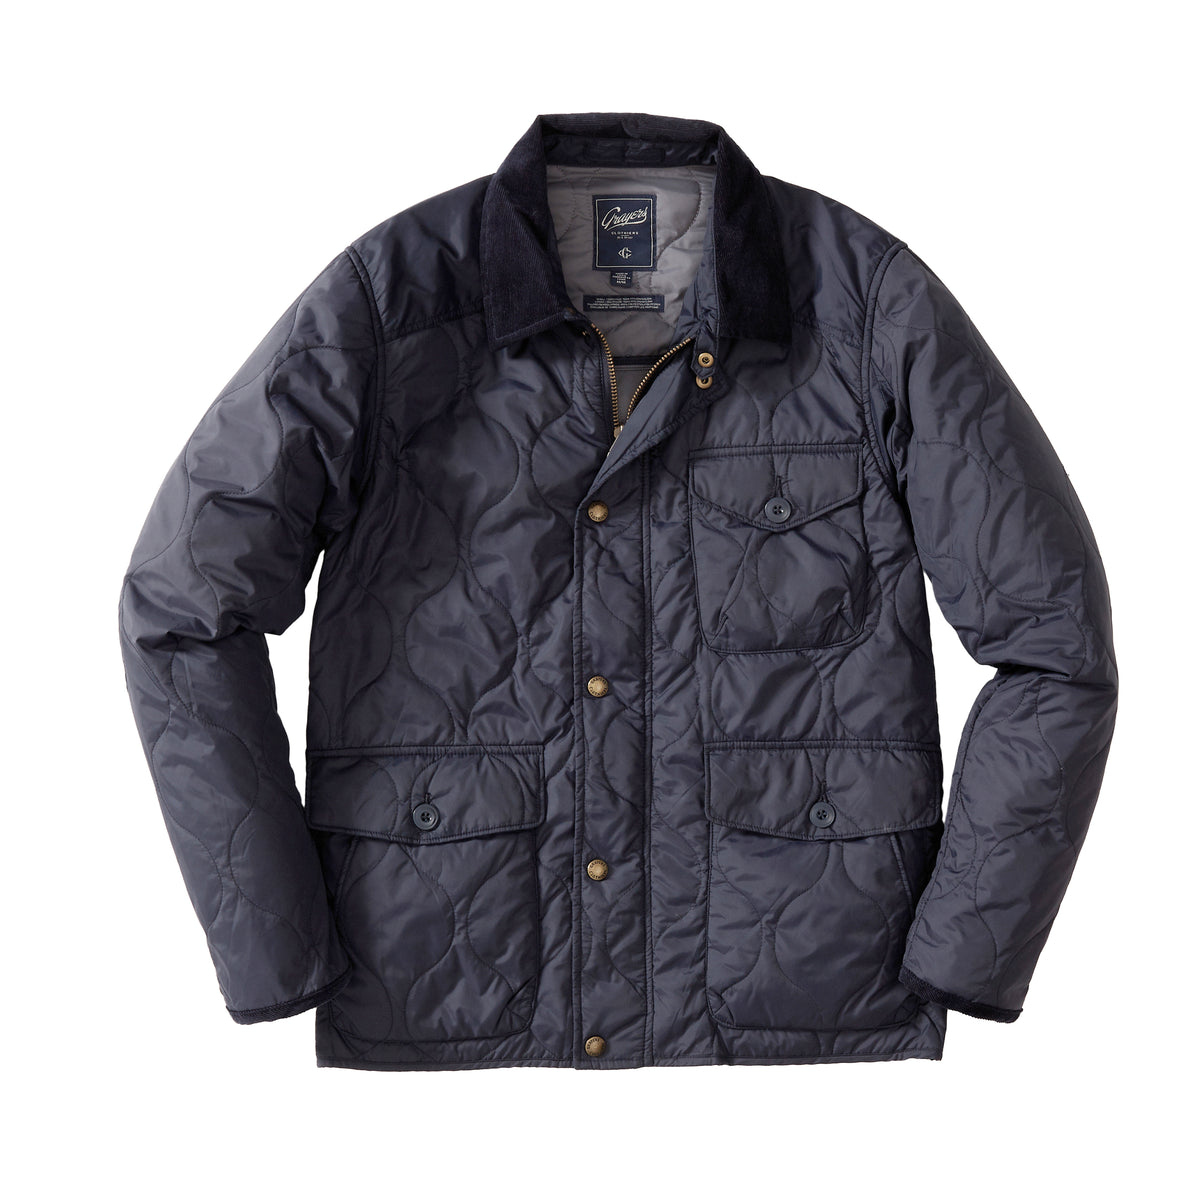 QUILTED JACKET WITH POCKETS - Grey